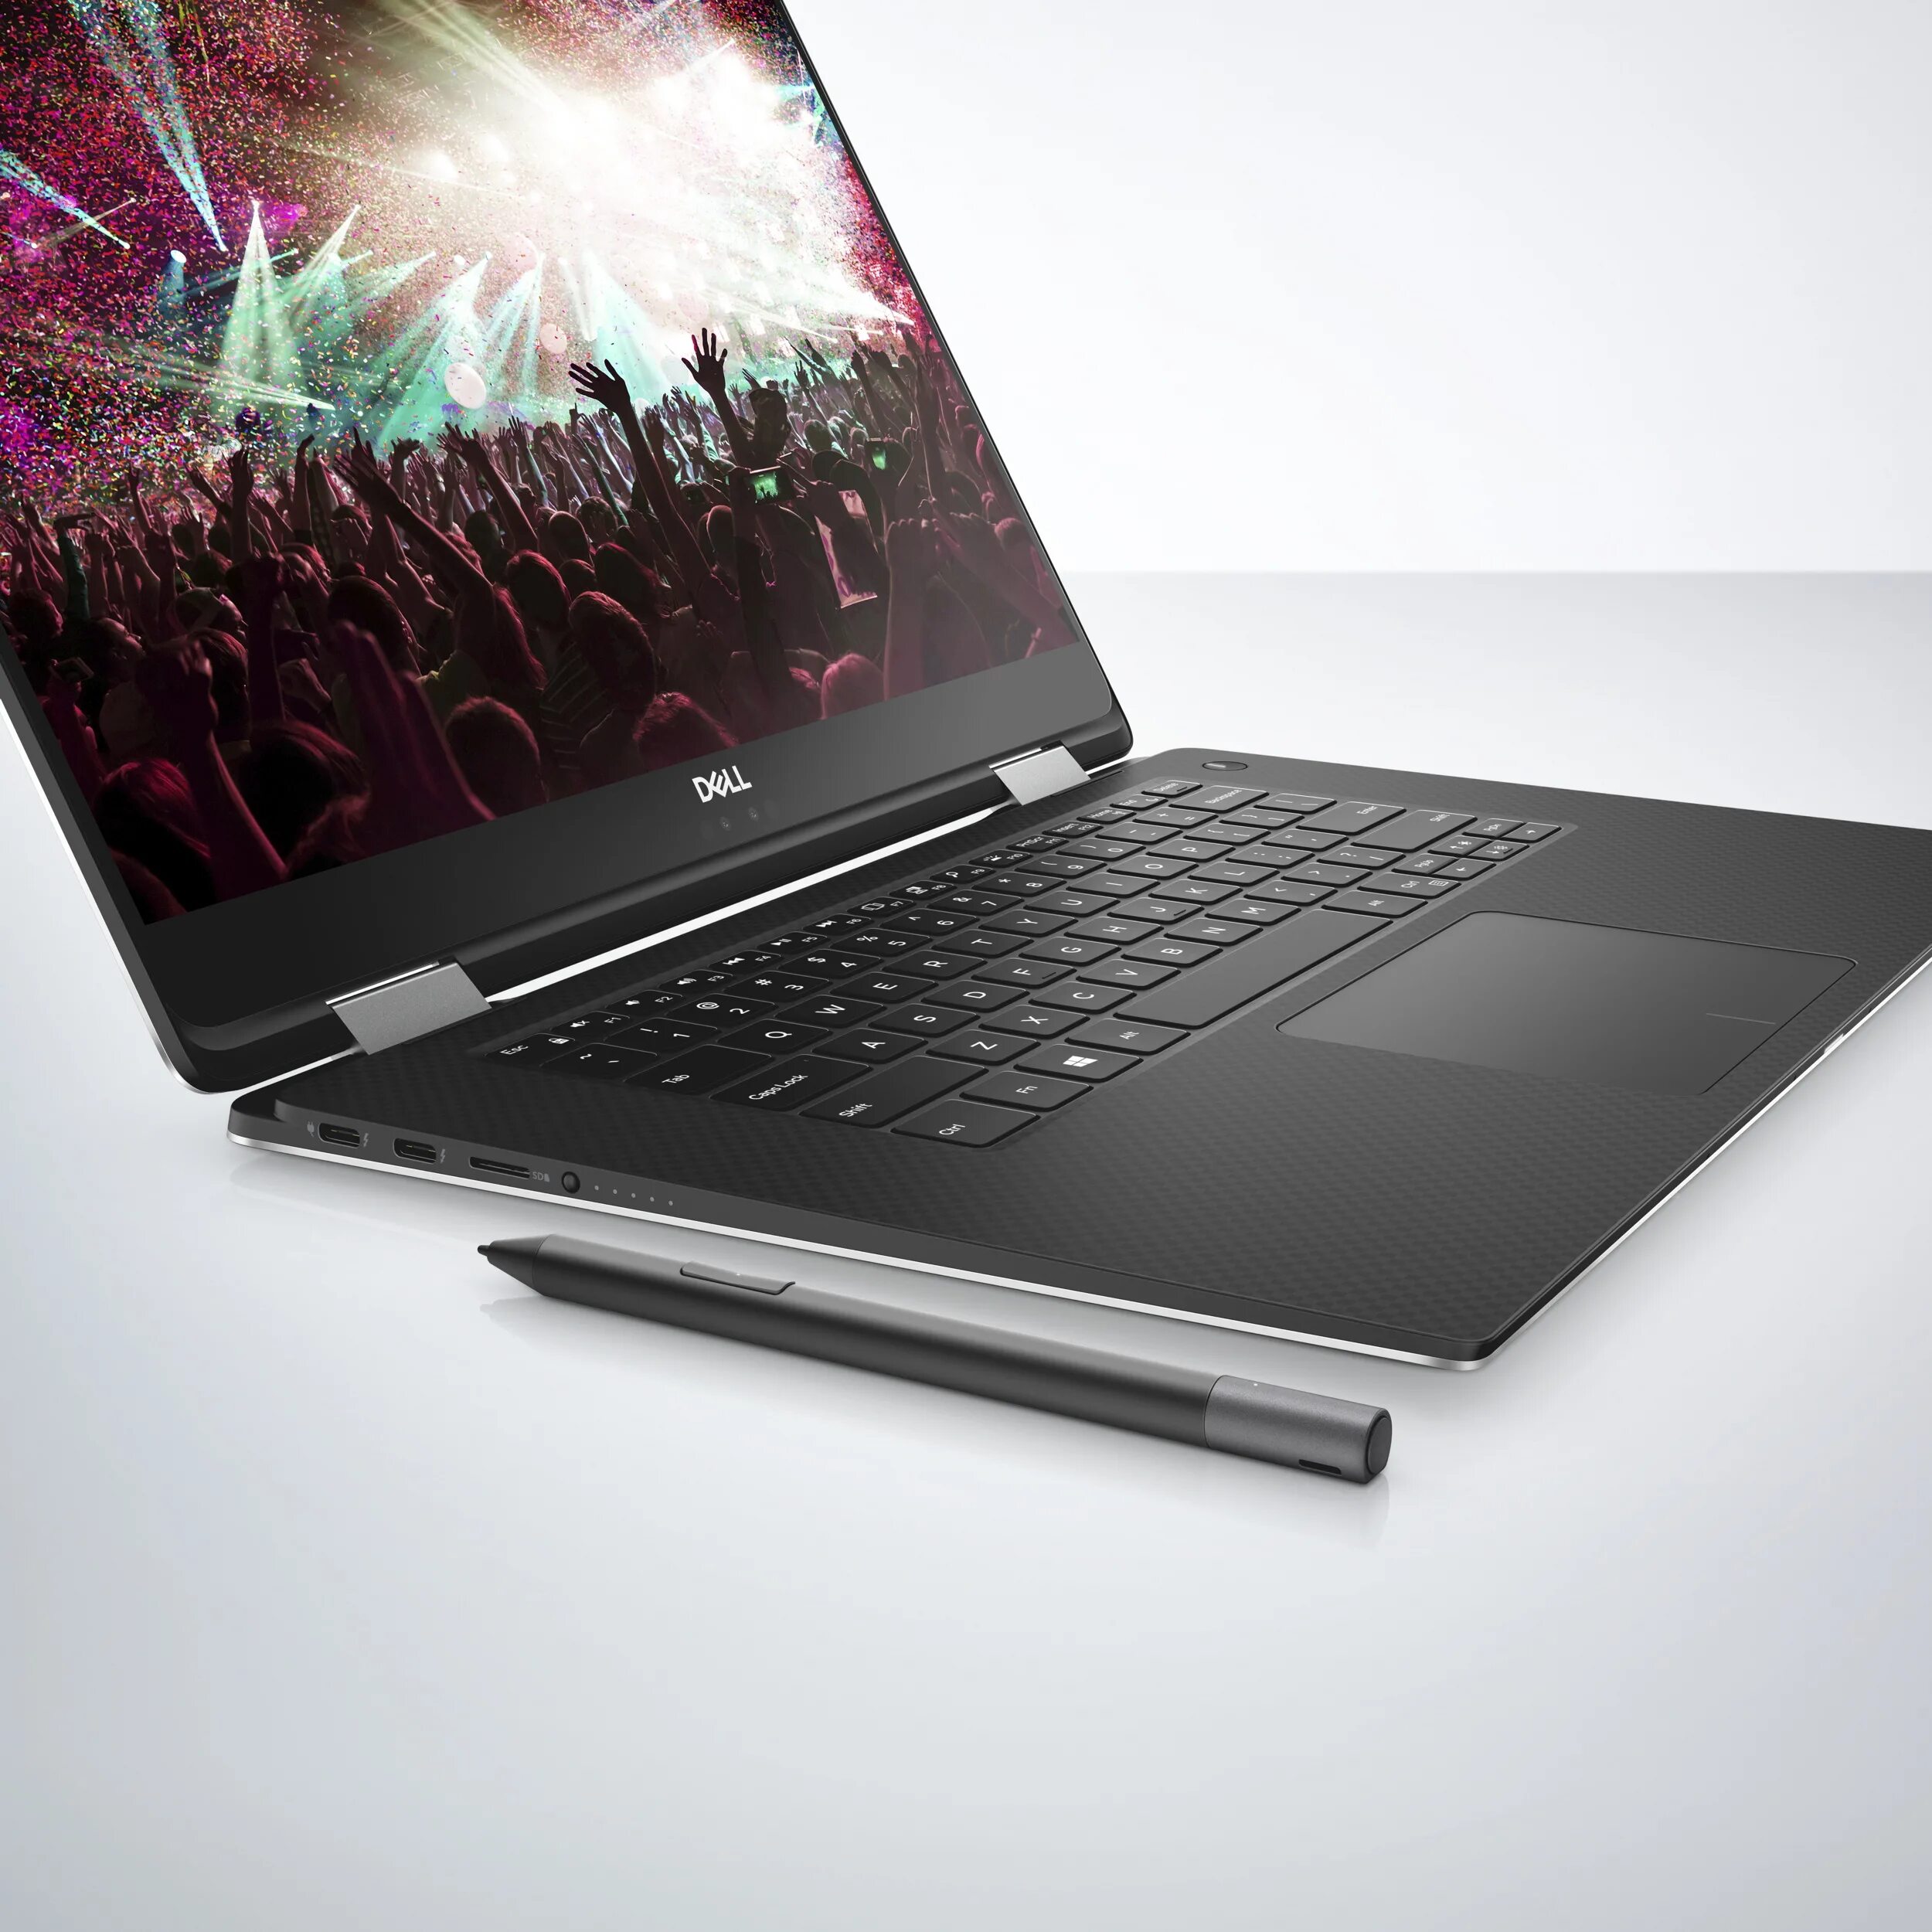 Dell XPS 15. Ноутбук dell XPS 15 9575 2-in-1. Dell 9575. Dell XPS 15 i5.